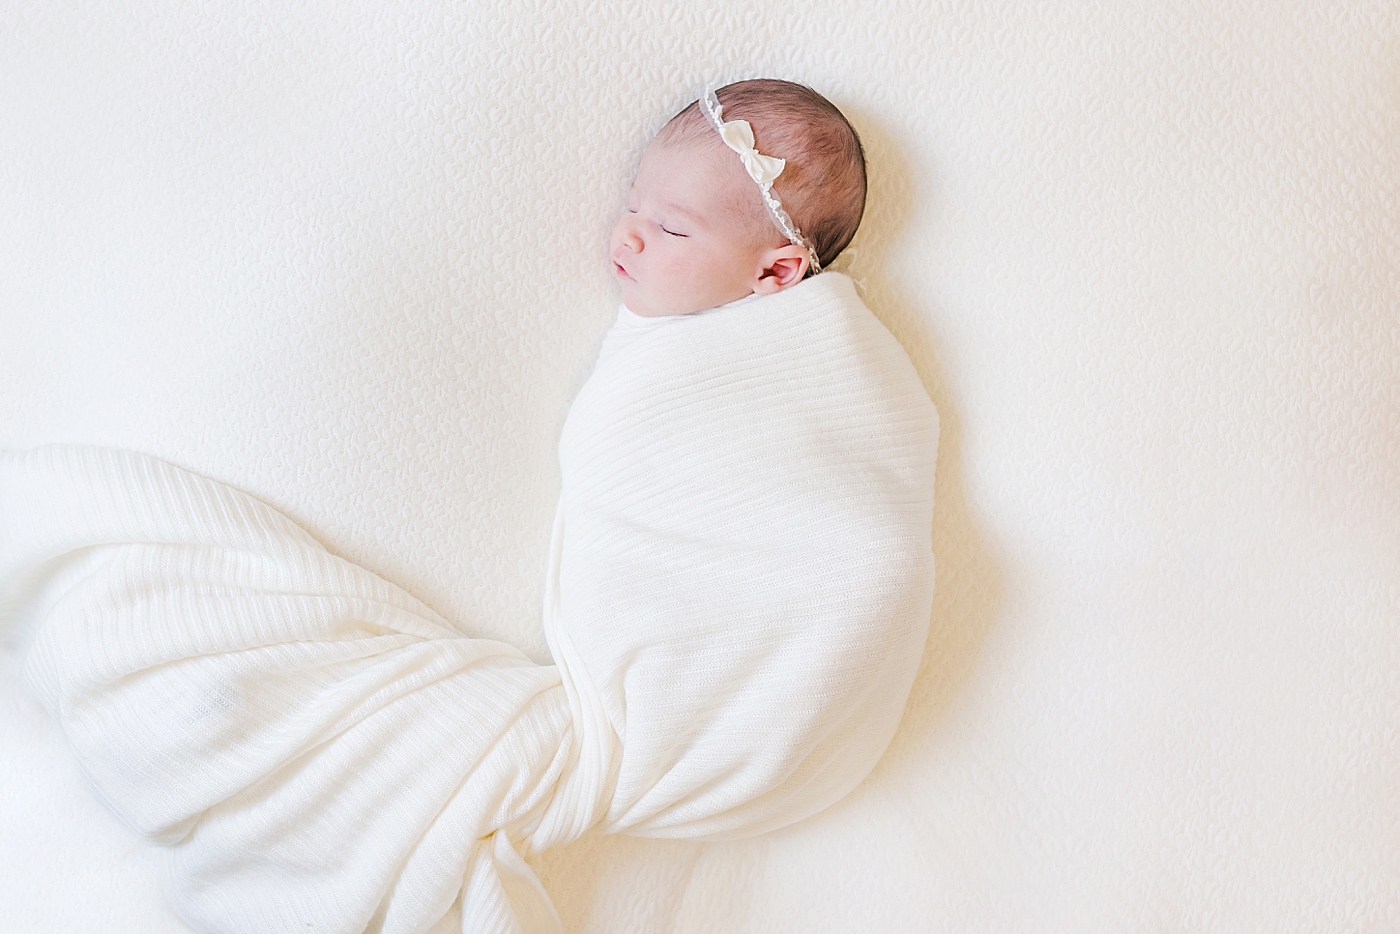 Newborn baby girl wrapped in a white swaddle | Photo by Anna Wisjo Photography